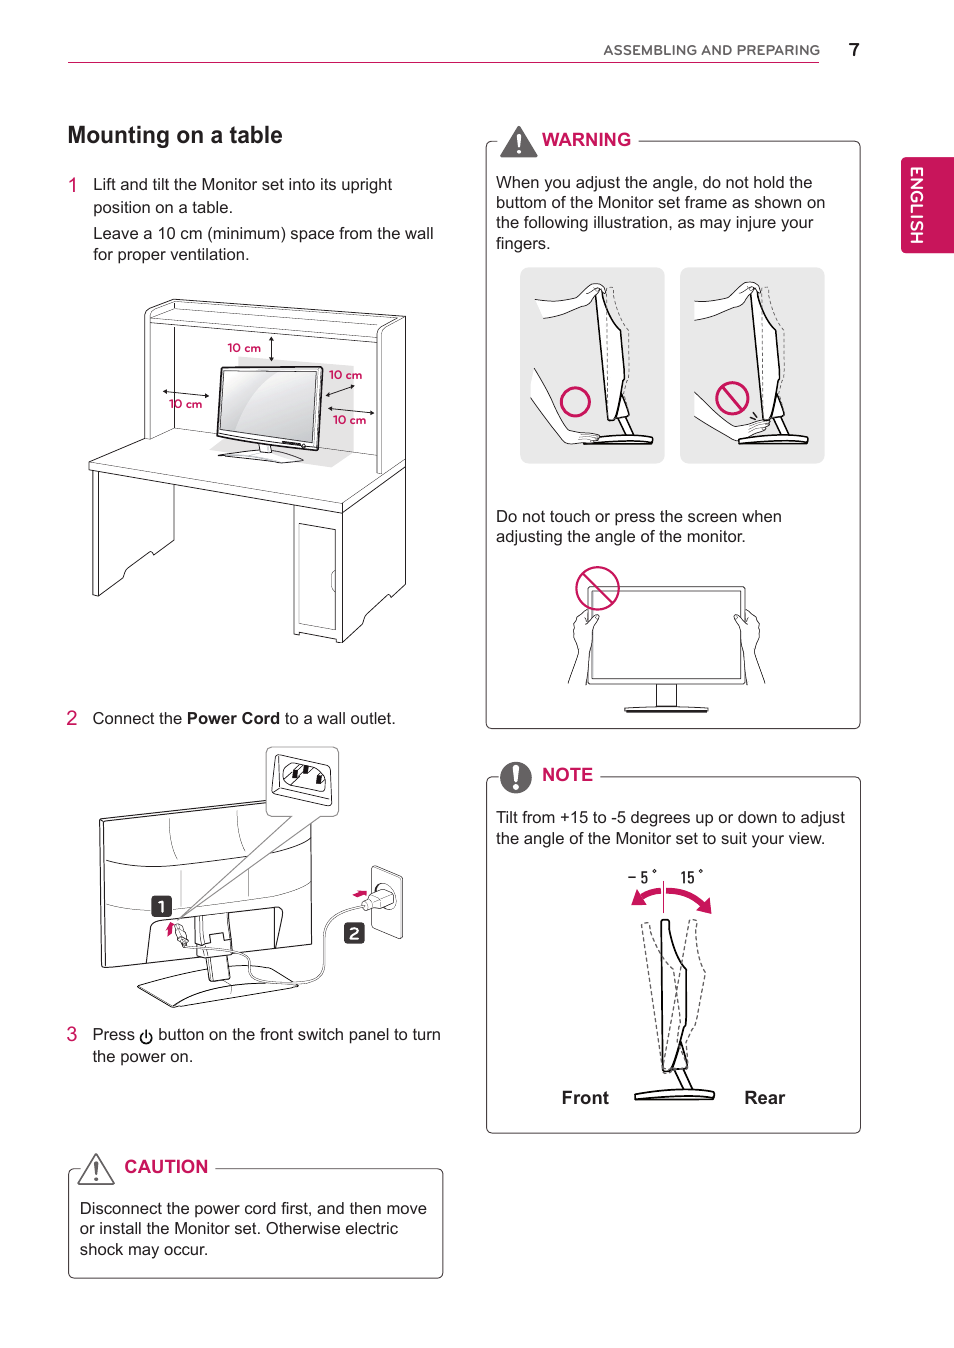 Mounting on a table | LG D2342P User Manual | Page 7 / 22